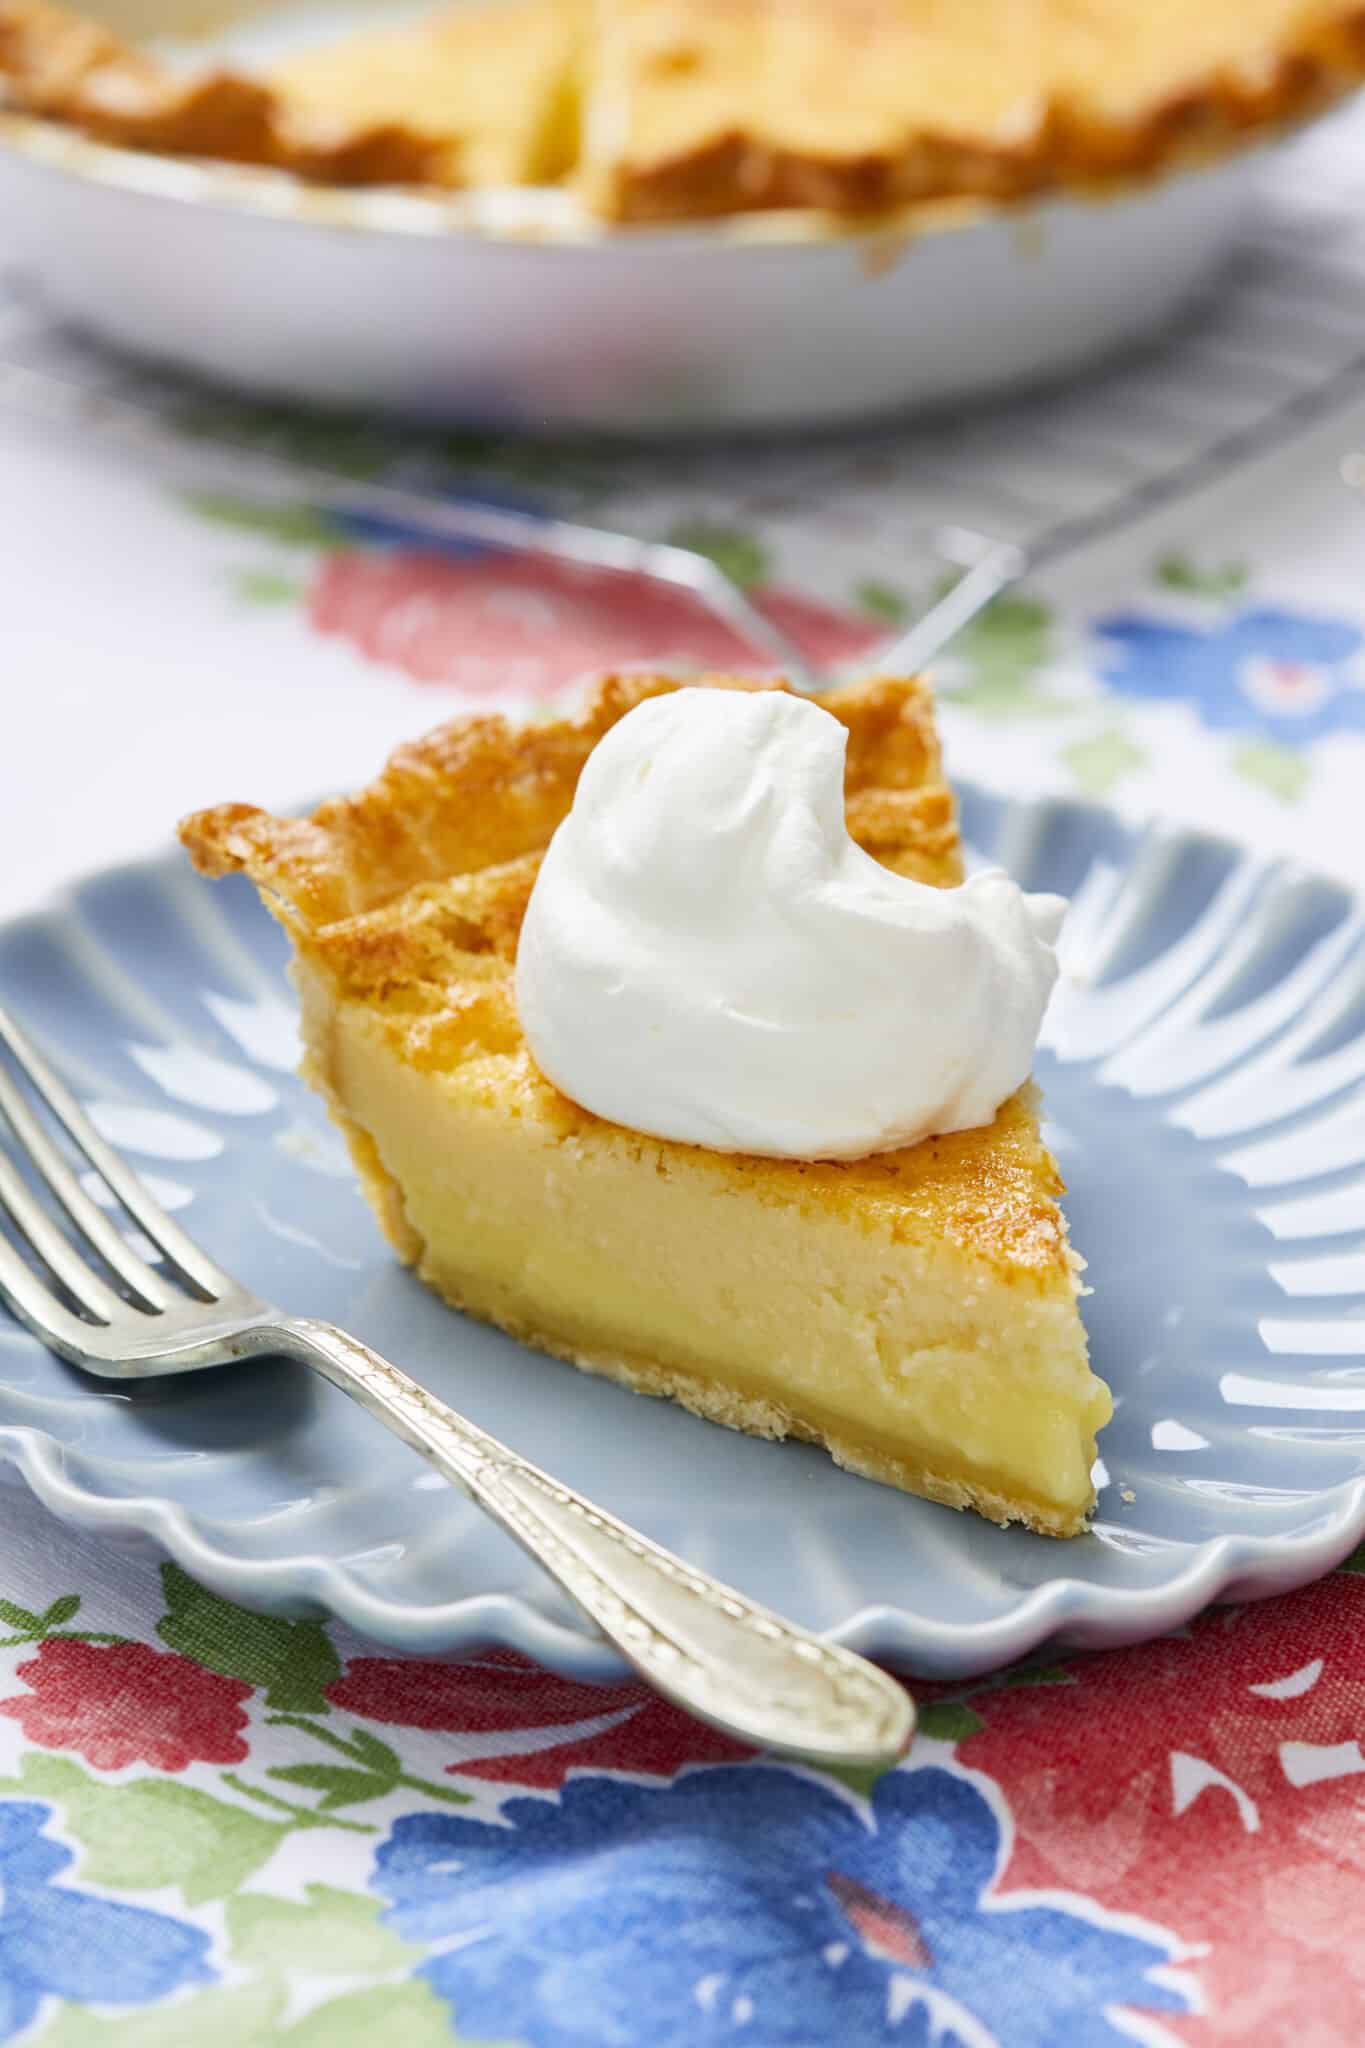 The Irresistible Buttermilk Pie is baked in an aluminum pie dish. One slice is served on a blue dessert plate, with flaky crust, silky custard filling with caramelized top, crowned with freshly whipped cream.